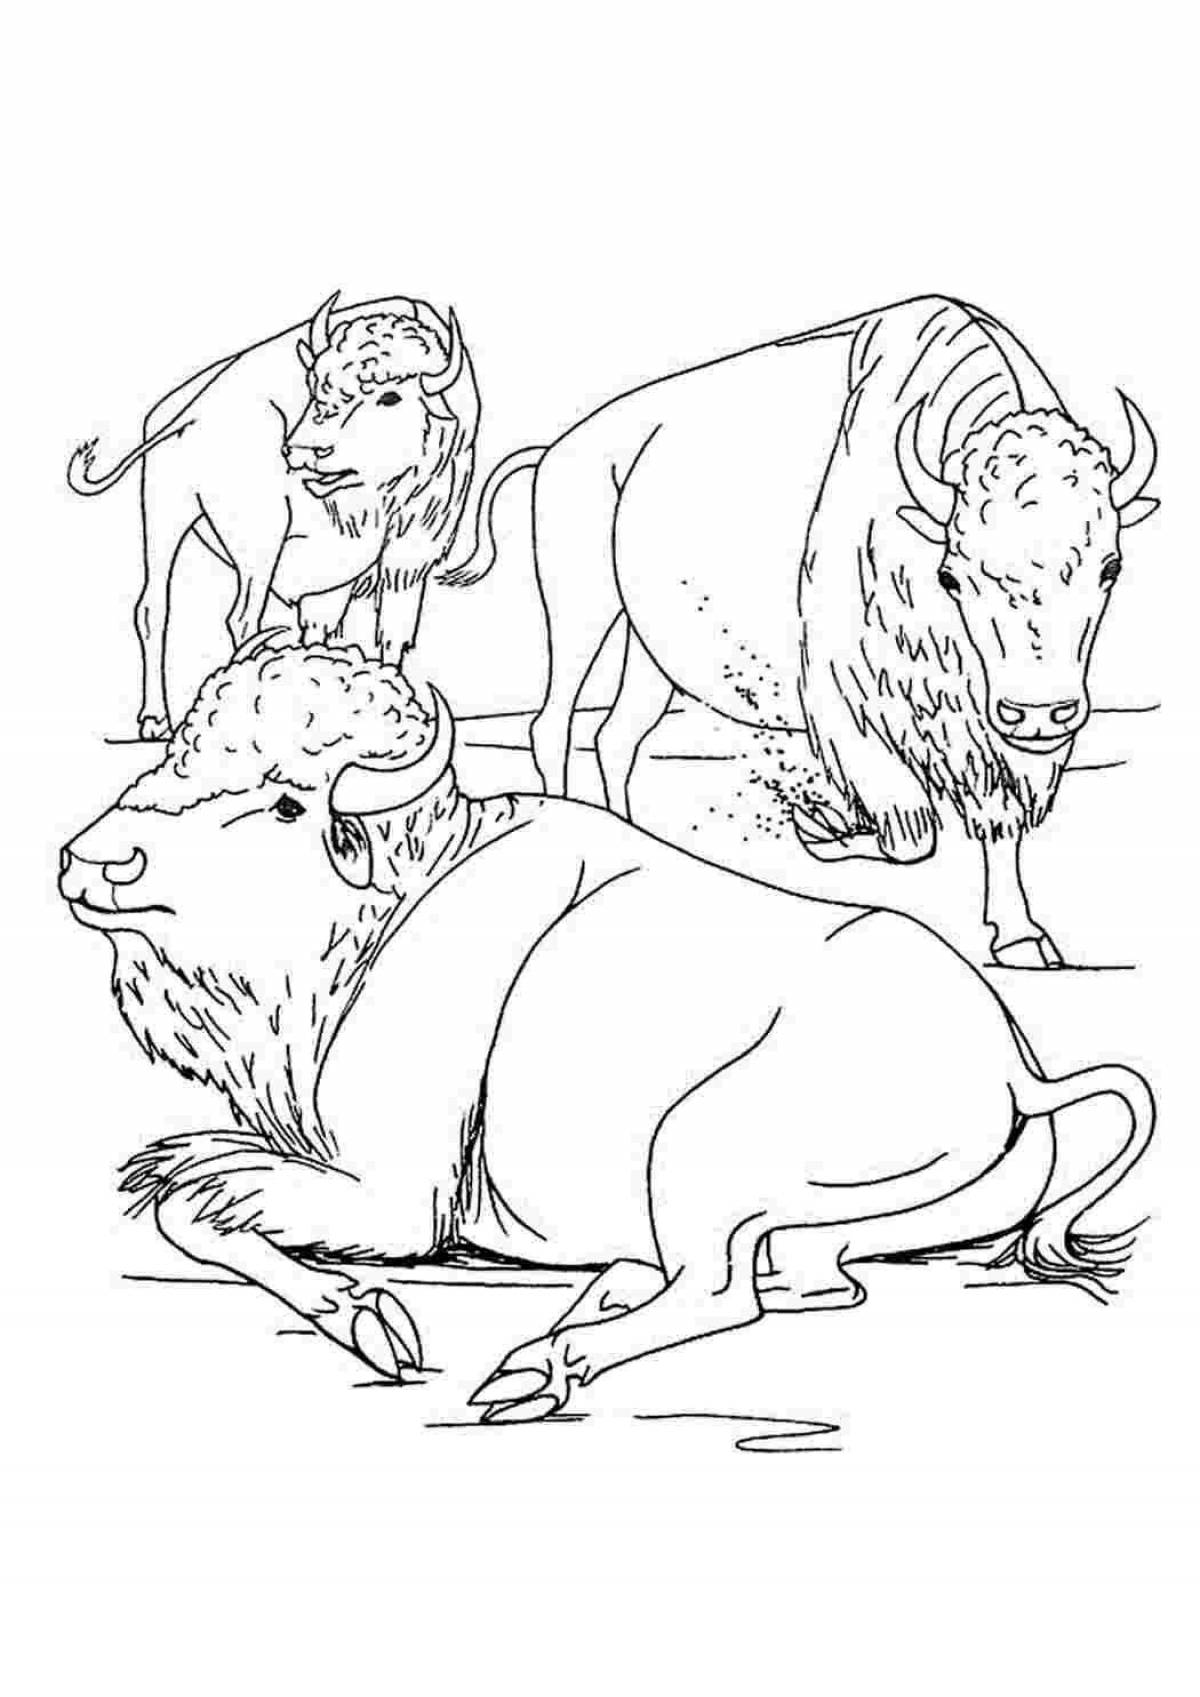 Coloring book magnificent bison